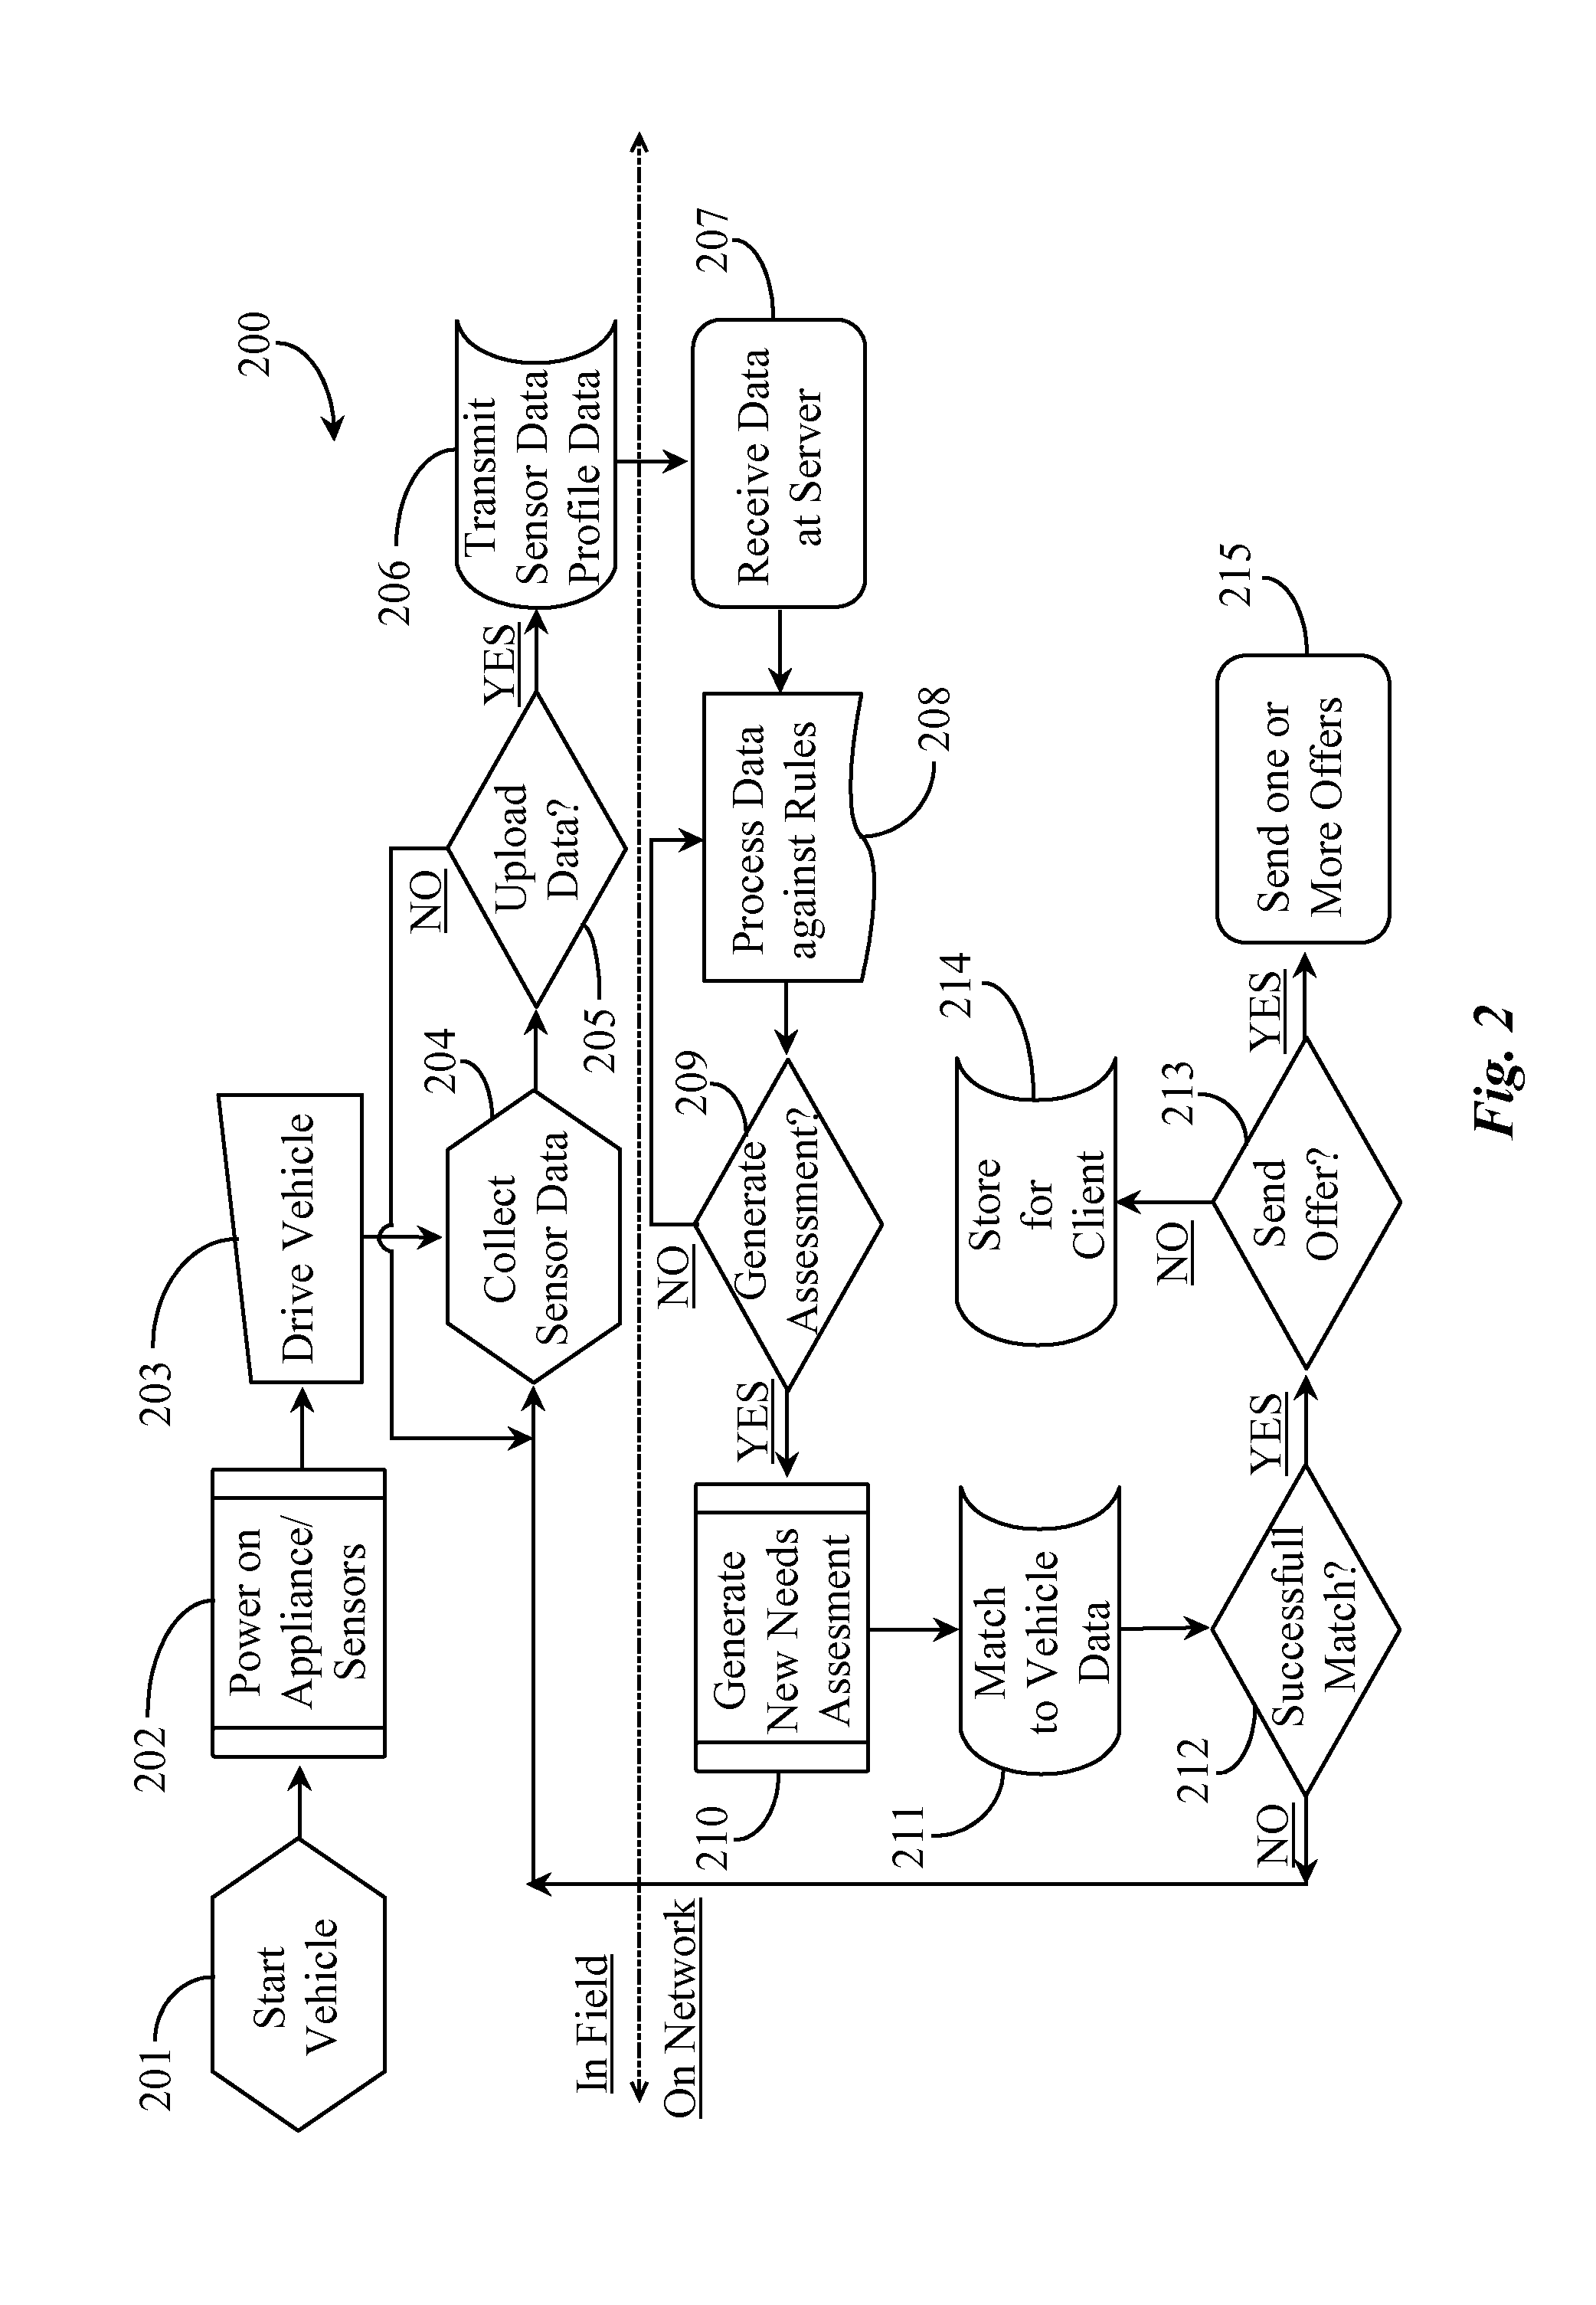 Vehicle Referral System and Service